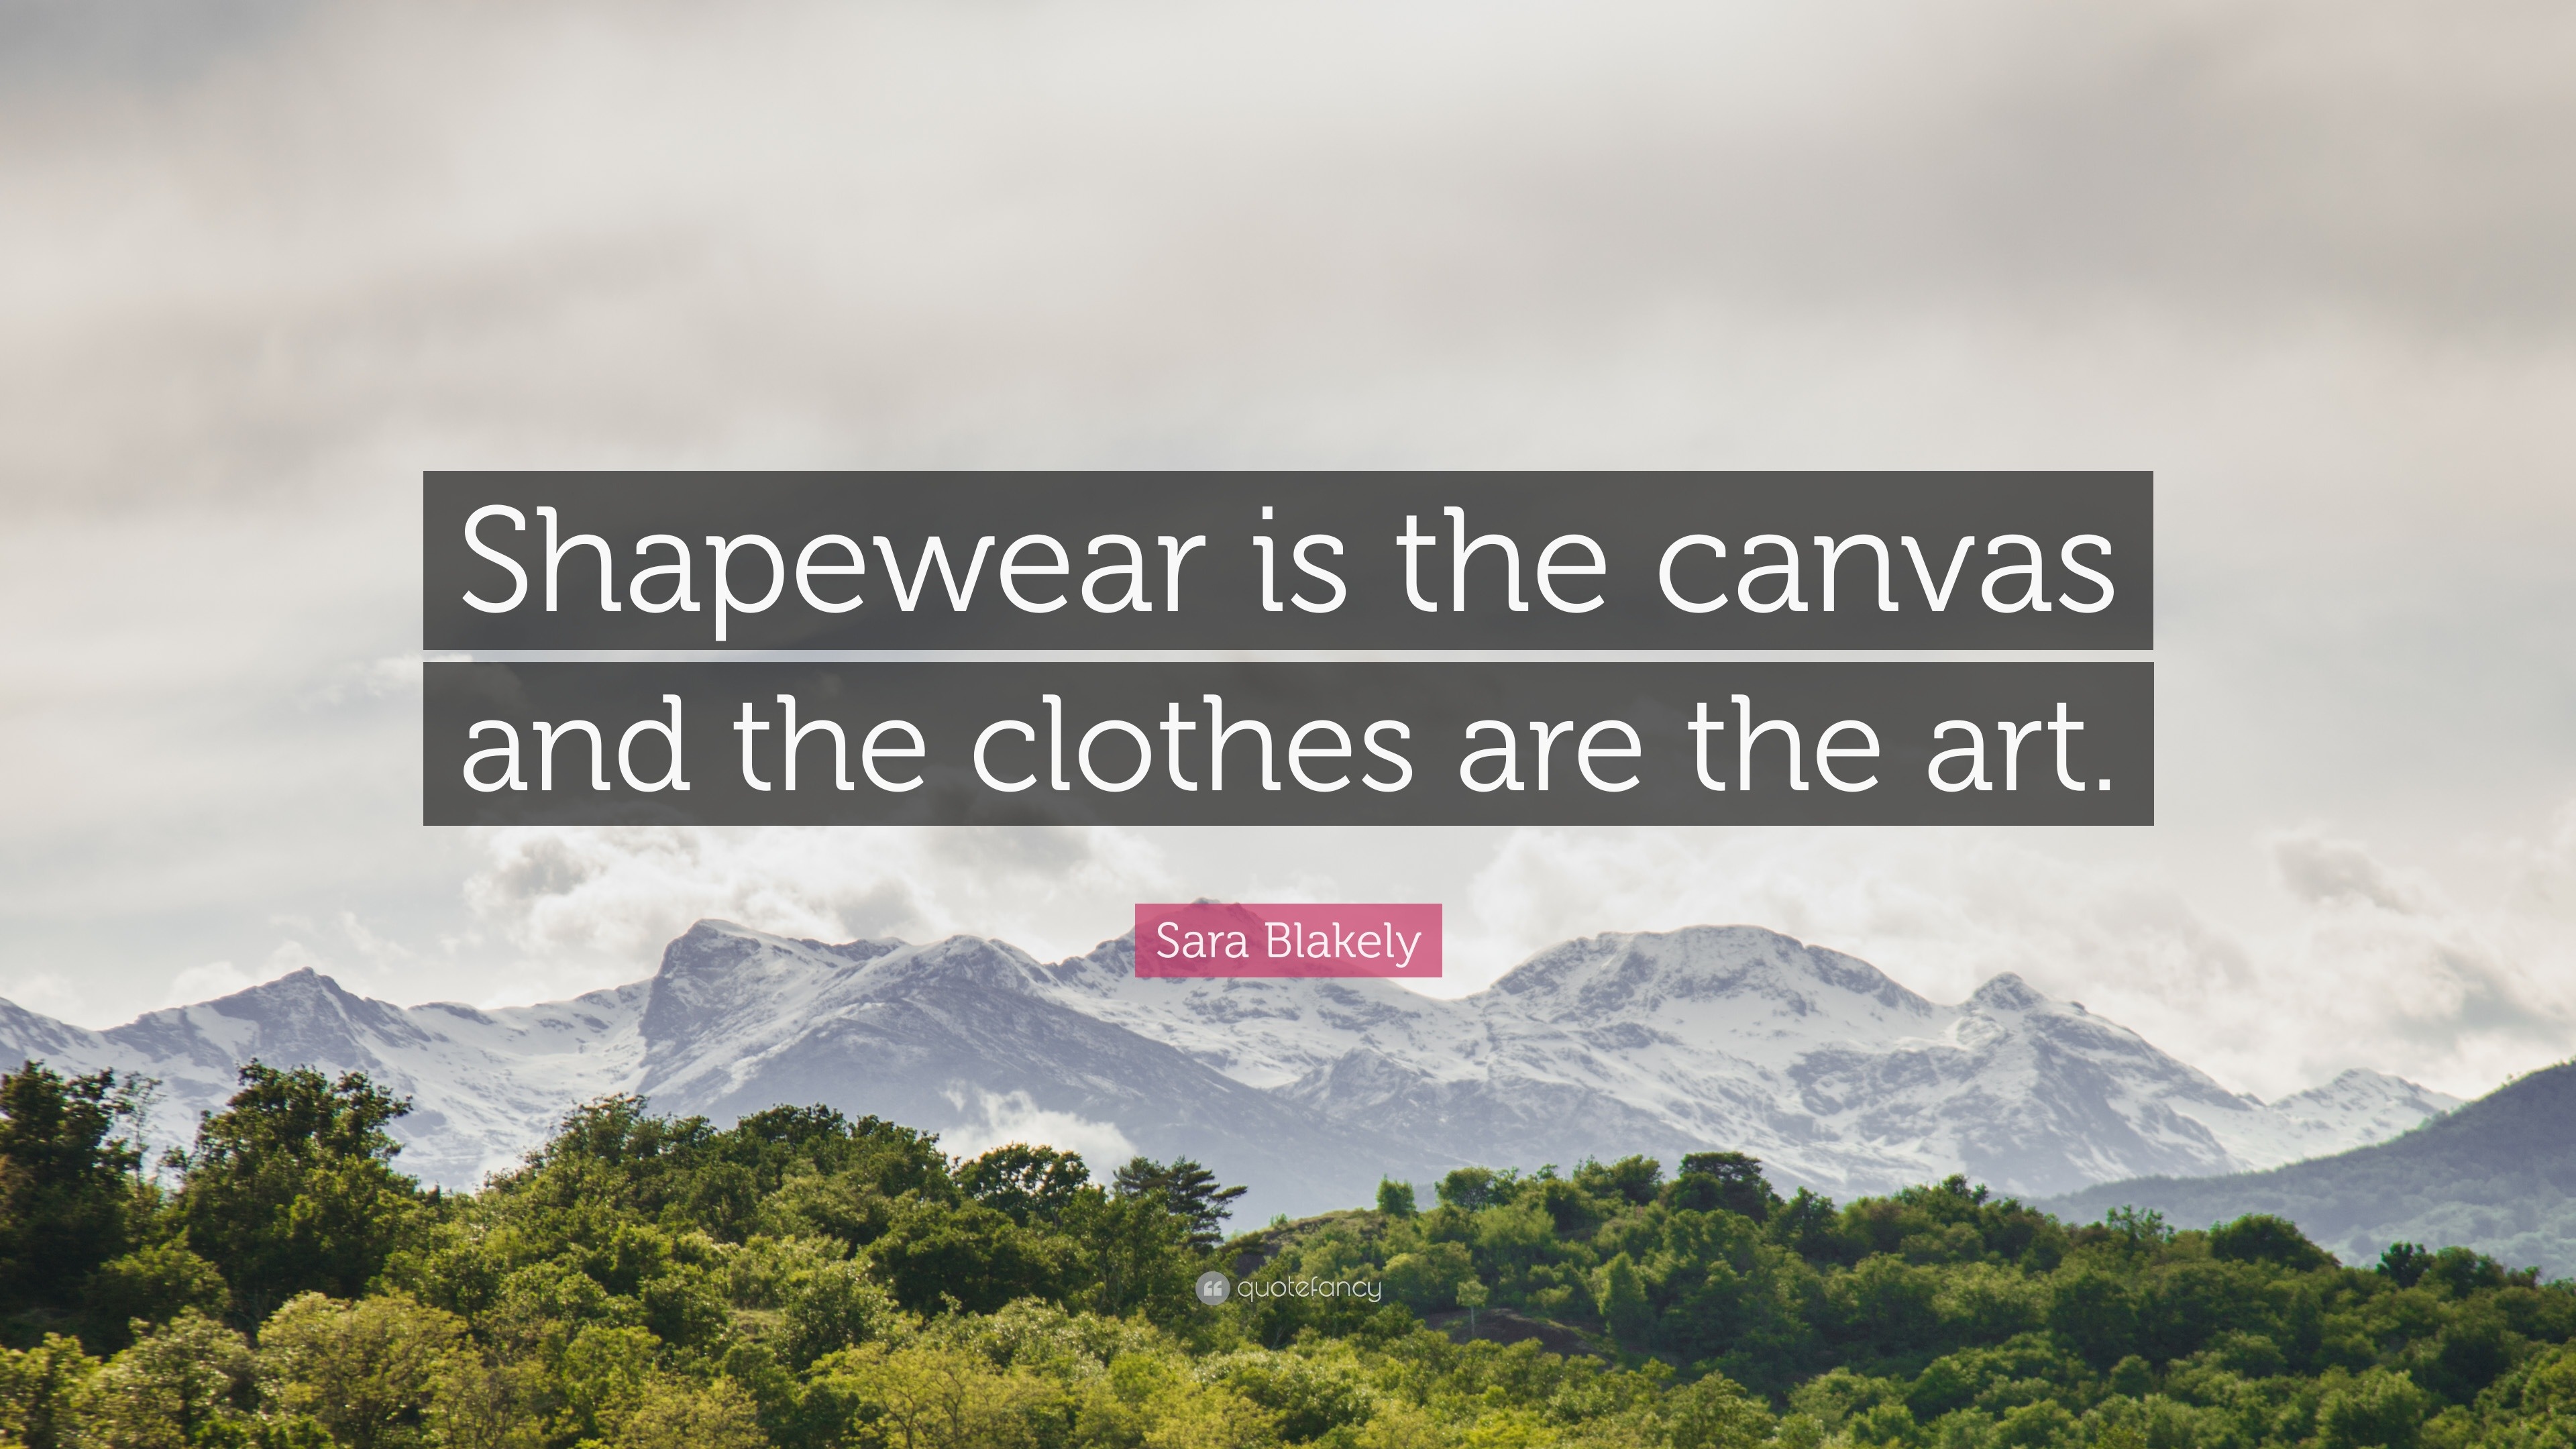 Sara Blakely Quote: “Shapewear is the canvas and the clothes are